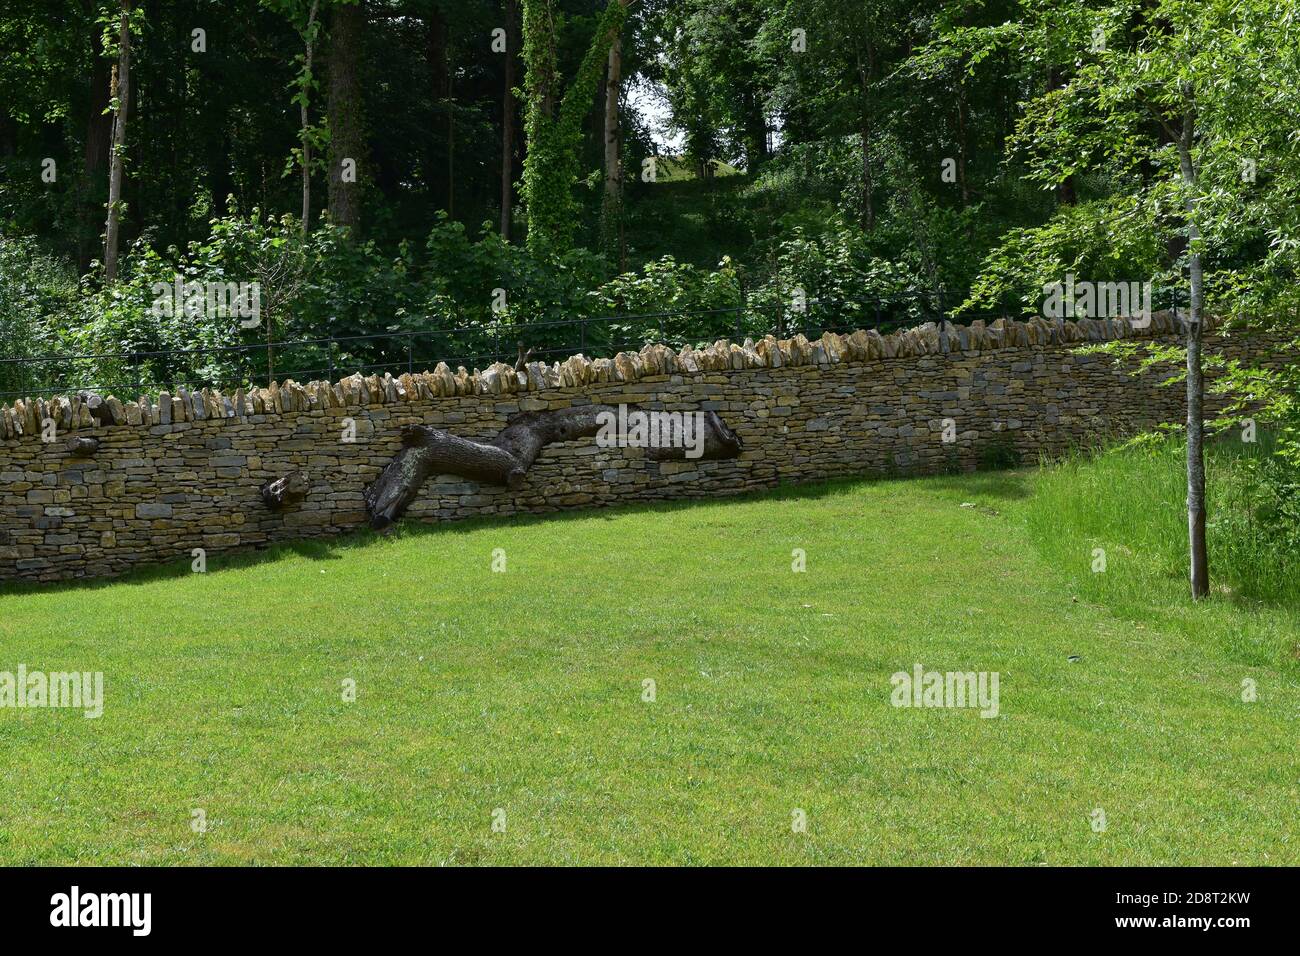 A beautiful dry stone wall with an architectural tree built through it at The Newt, a country garden and estate in Somerset. Stock Photo